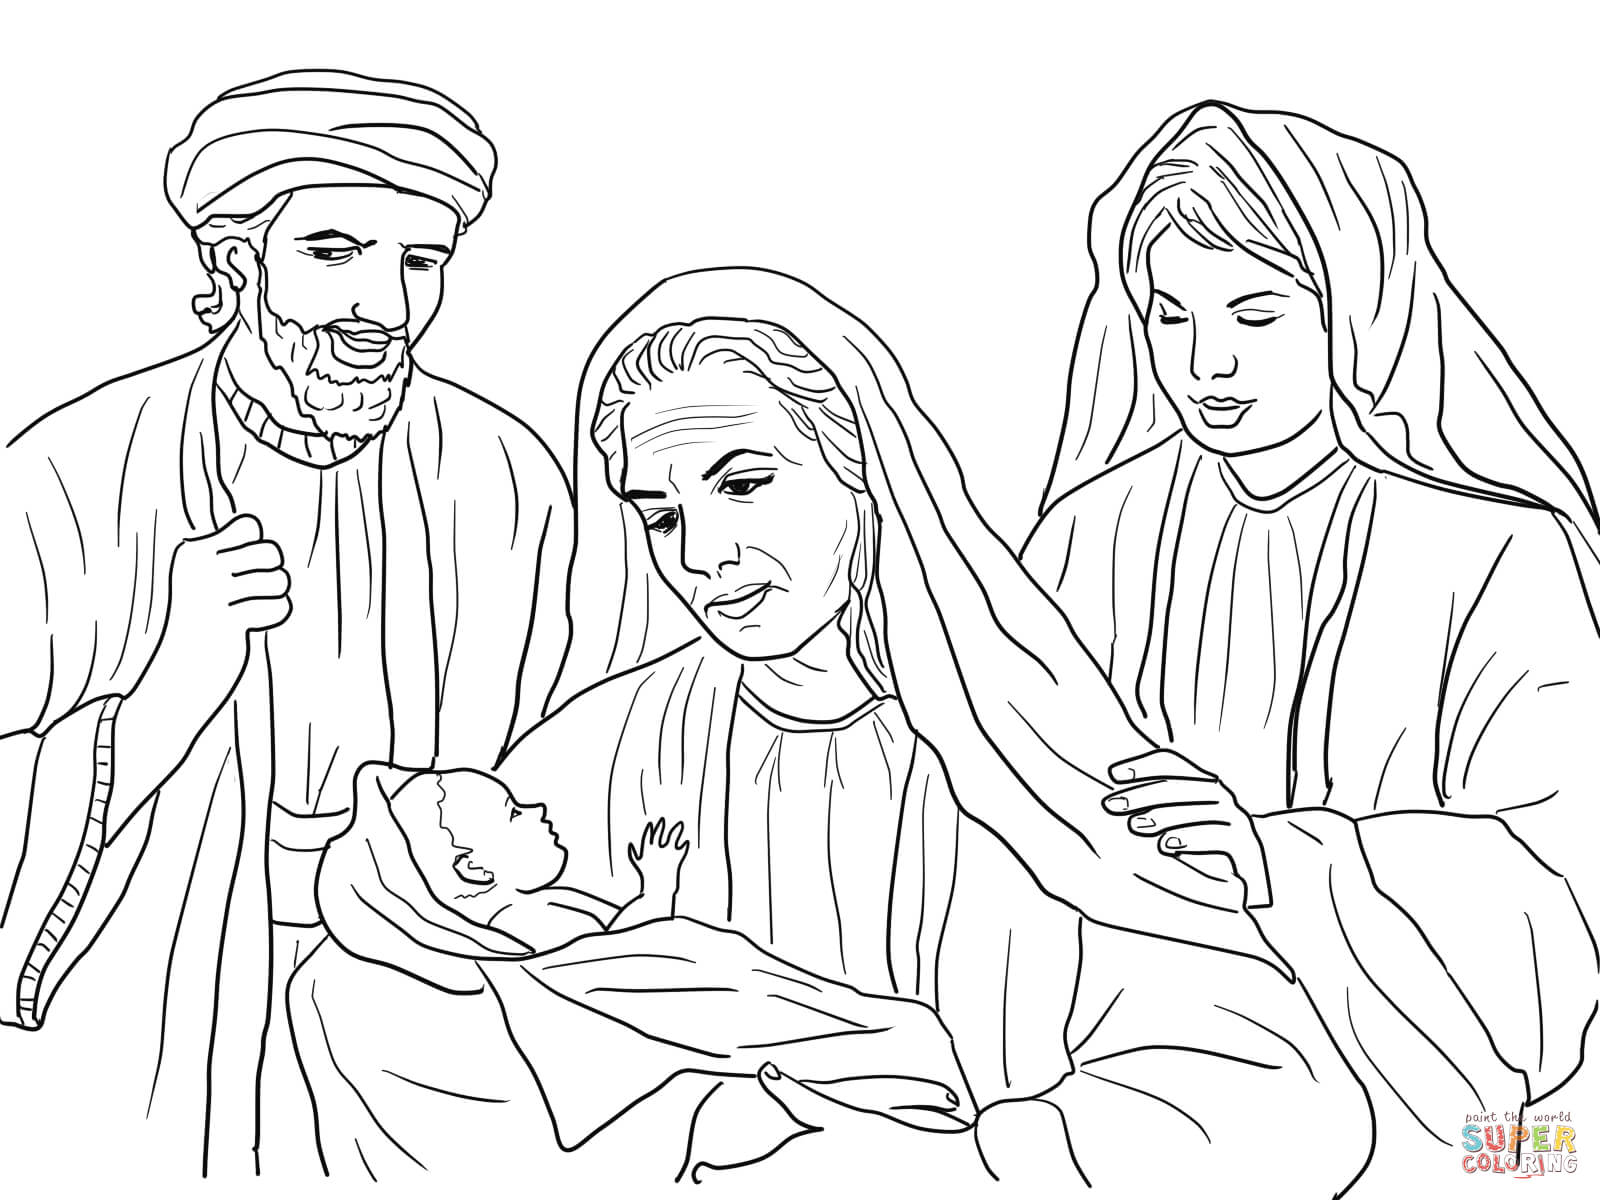 Boaz, Naomi, Ruth and Baby Obed coloring page | Free Printable ...